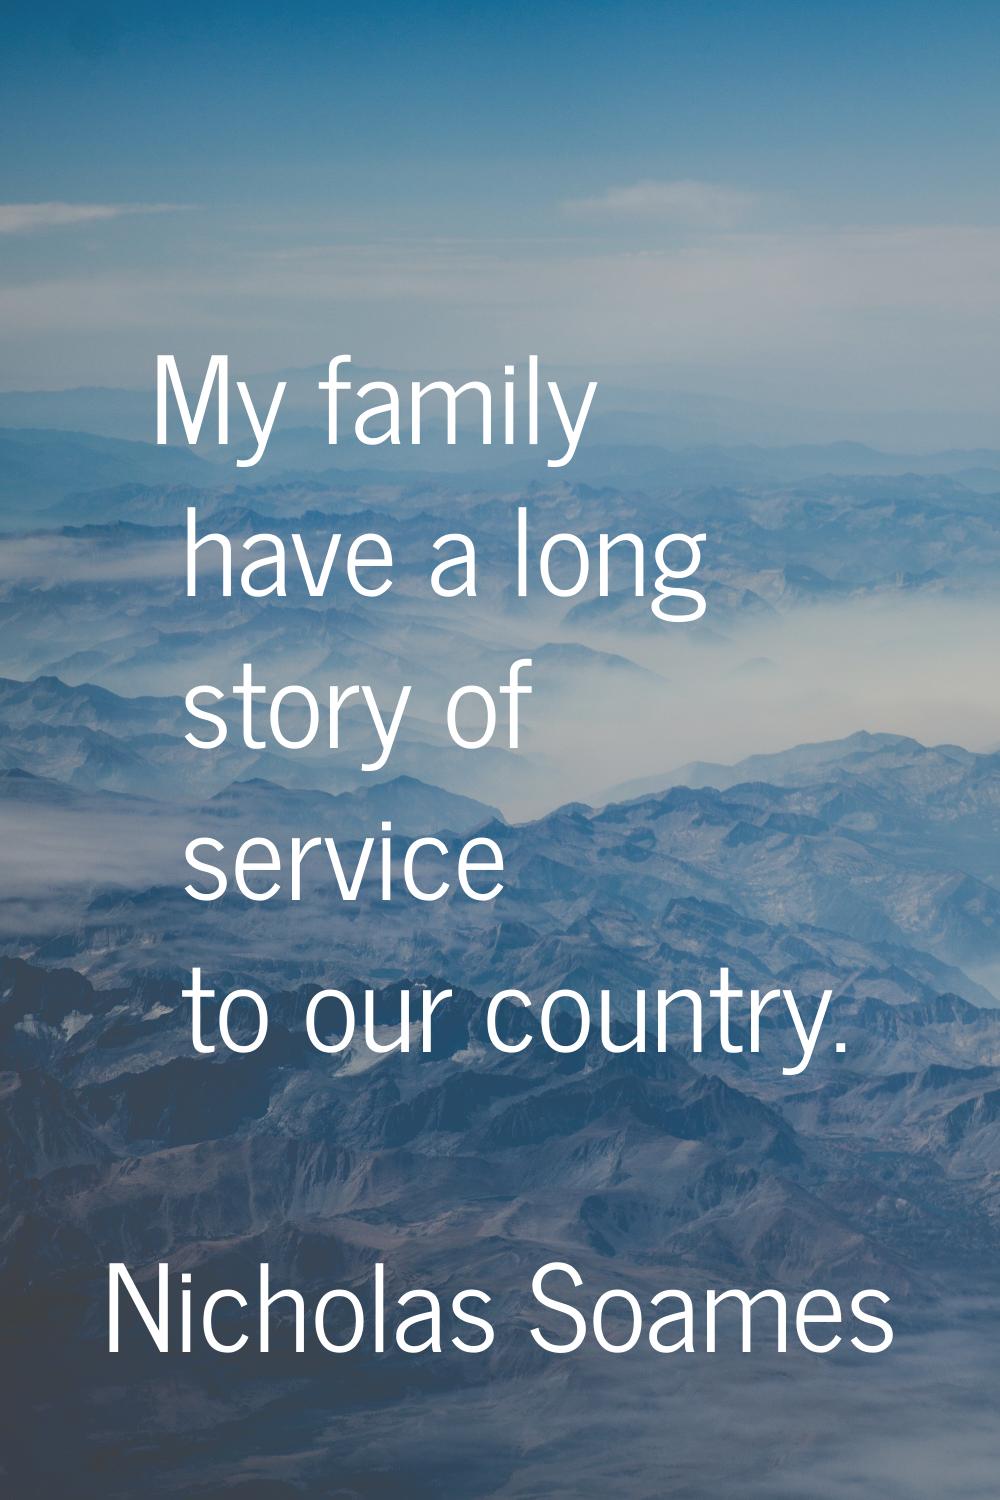 My family have a long story of service to our country.